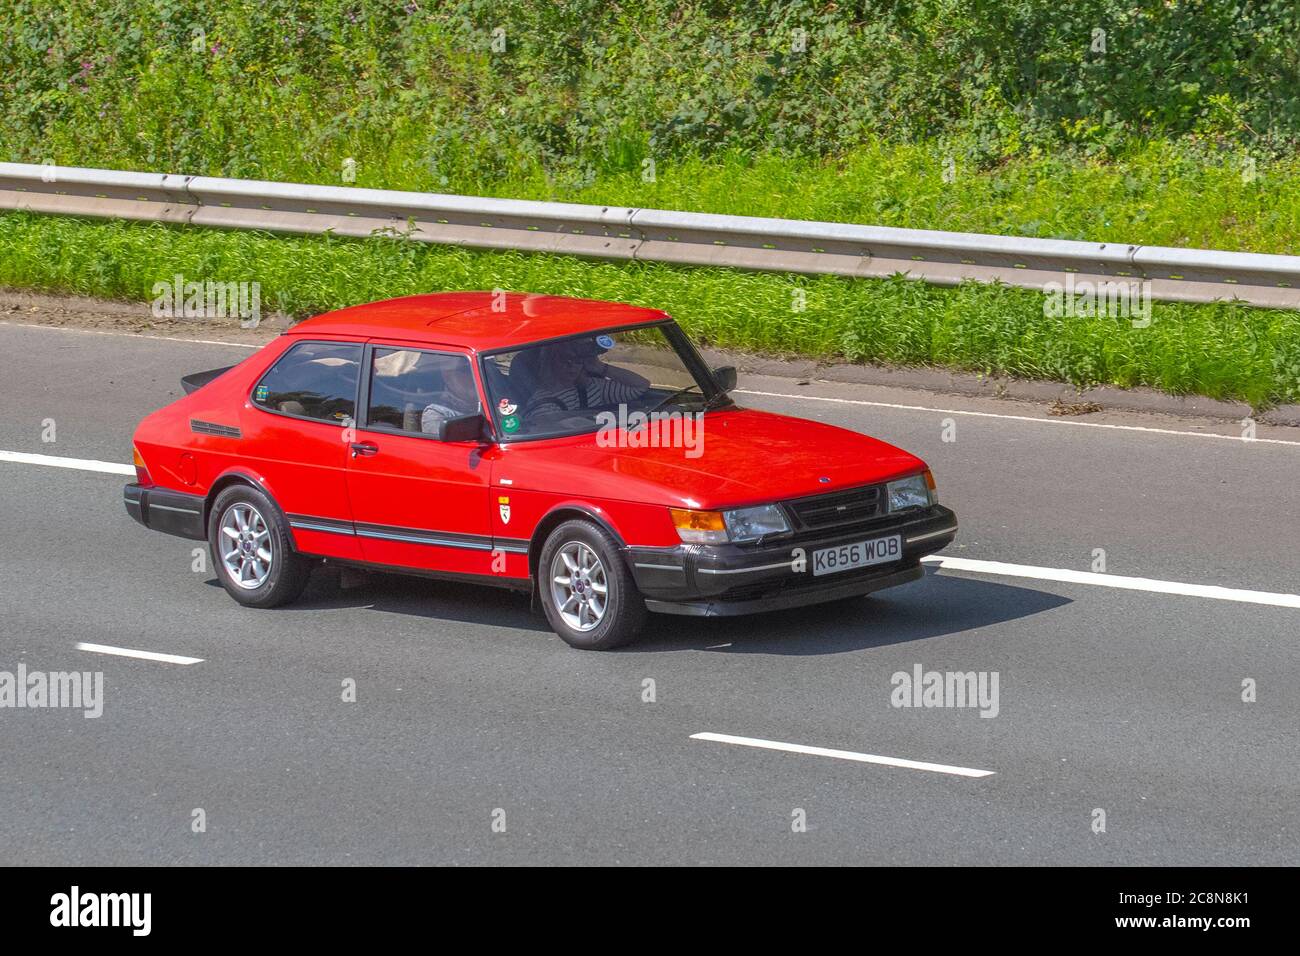 1992 RED Saab 900 S Turbo; Vehicular traffic moving vehicles, cars driving vehicle on UK roads, motors, motoring on the M6 motorway highway network. Stock Photo